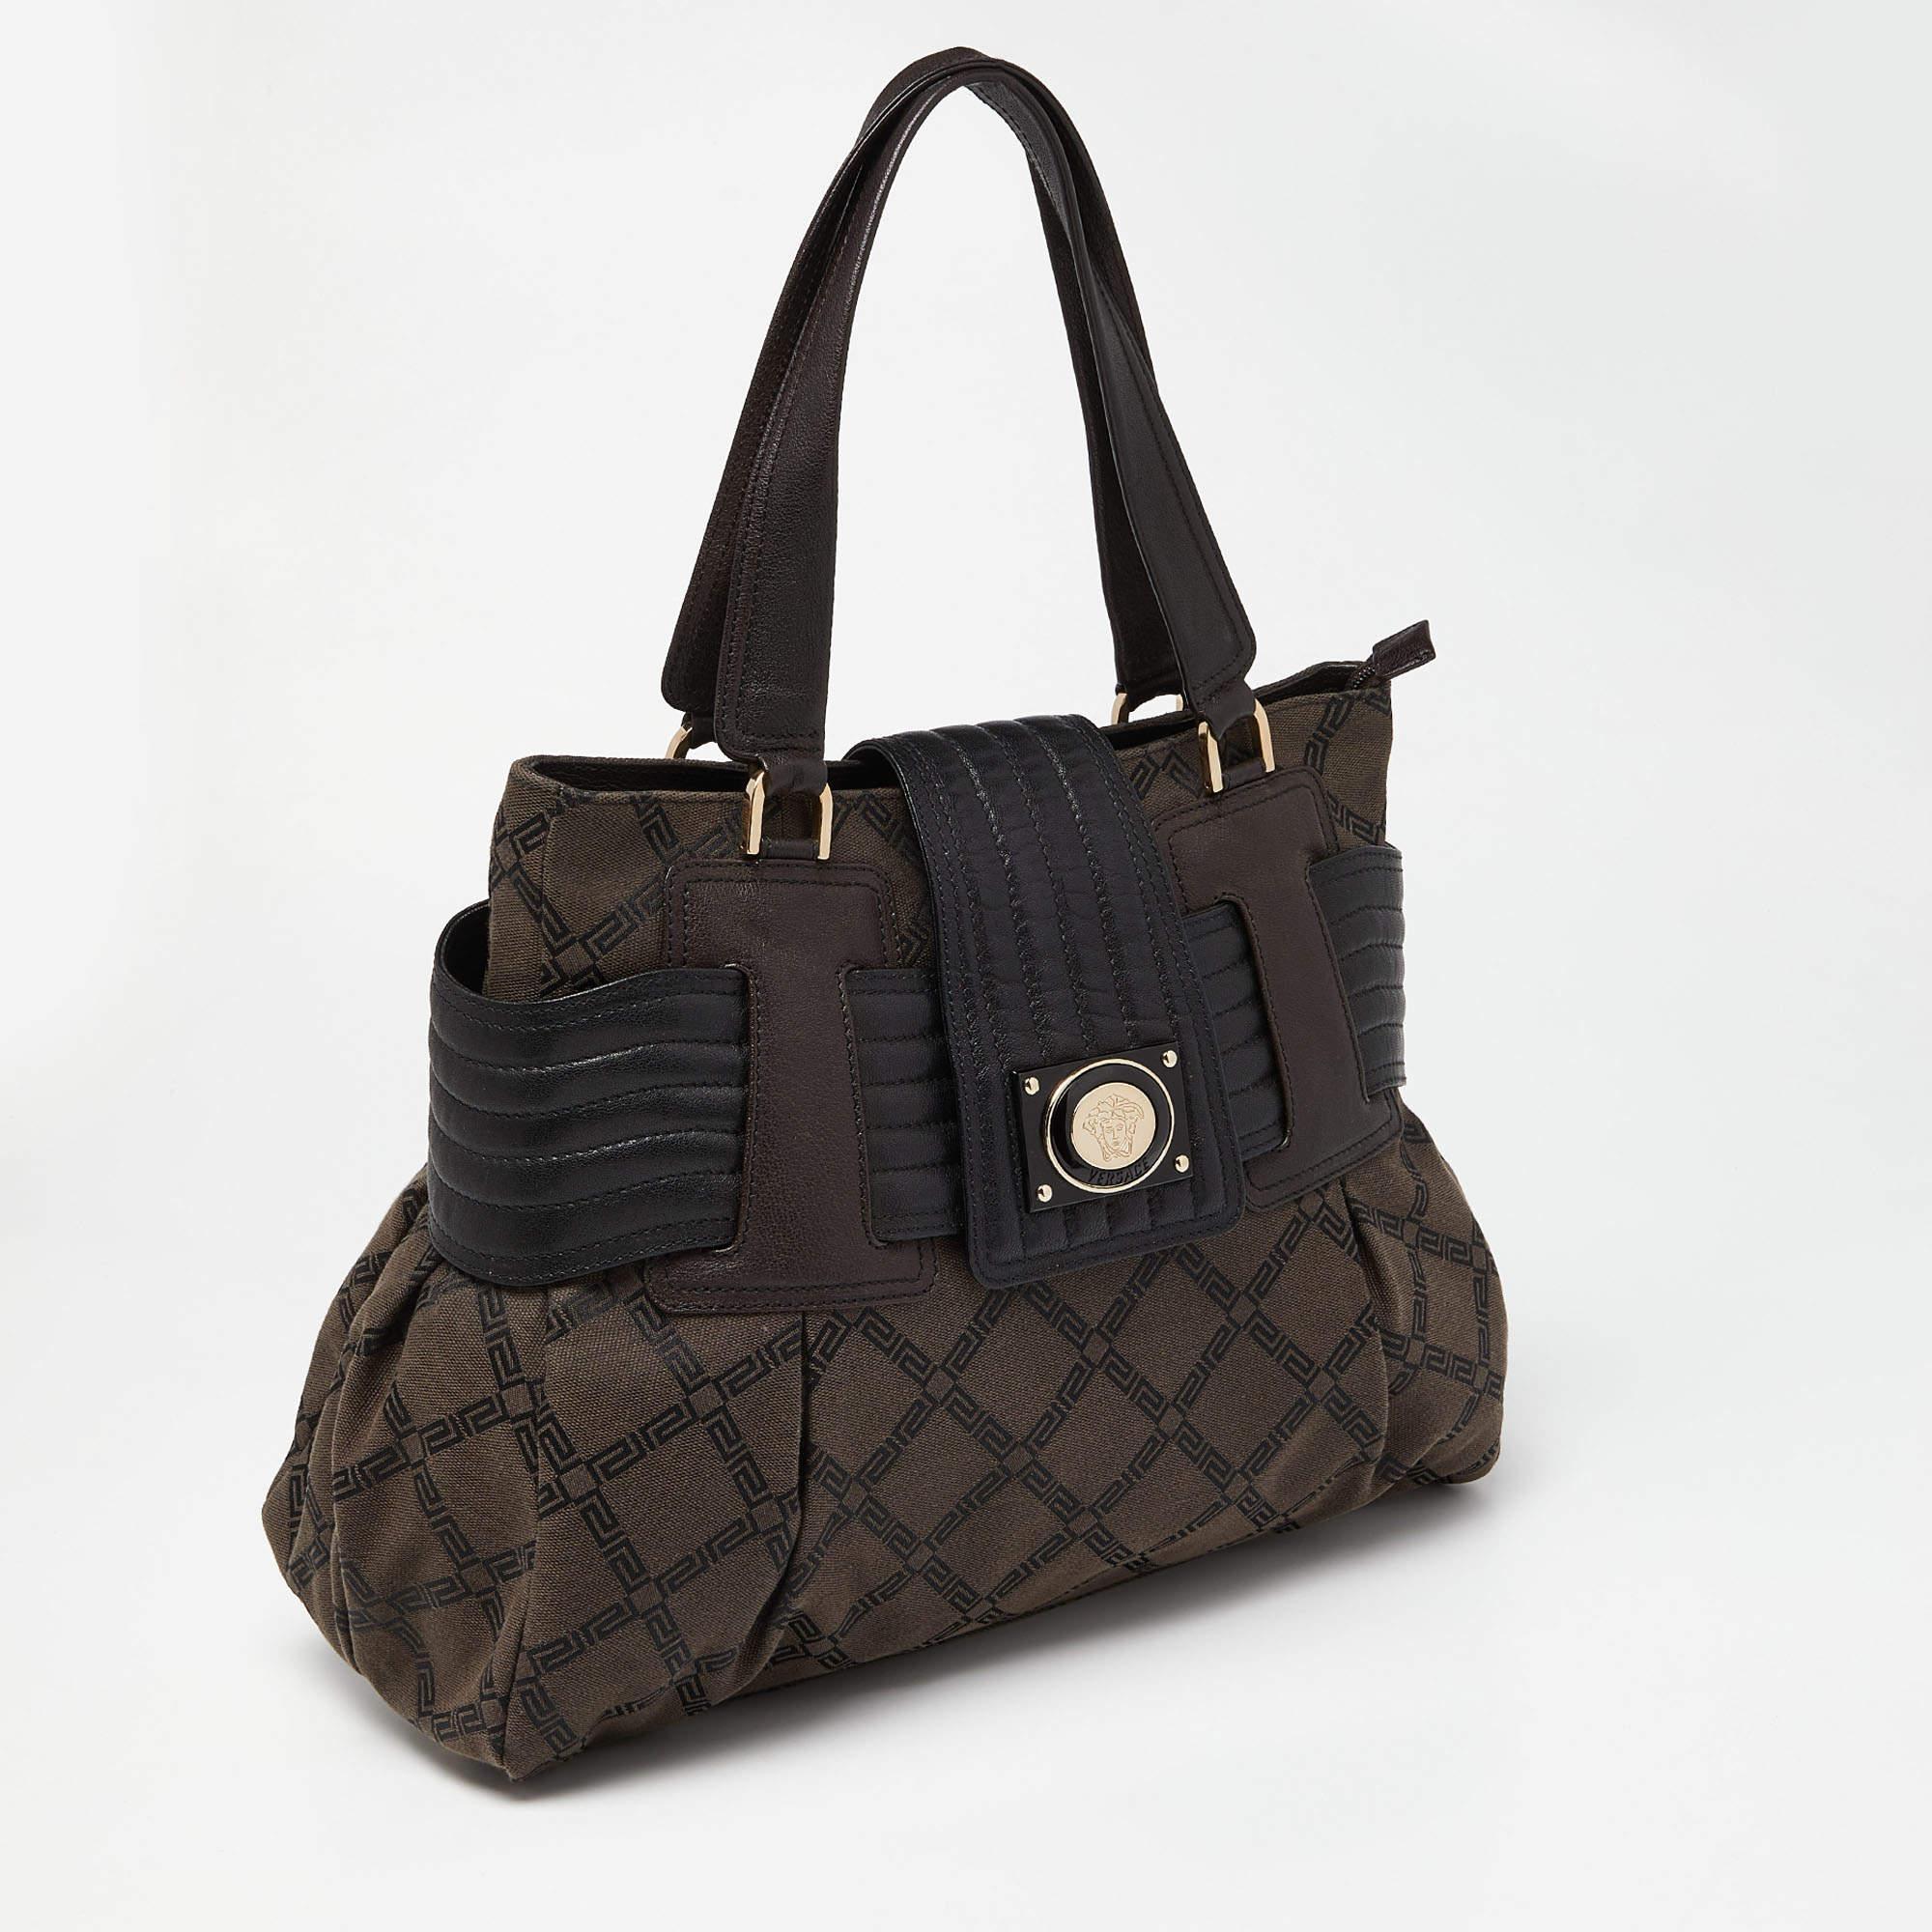 Ensure your day's essentials are in order and your outfit is complete with this Versace tote. Crafted using Monogram fabric & leather, the bag has two handles, the Medusa logo on the front, and a satin-lined interior.

